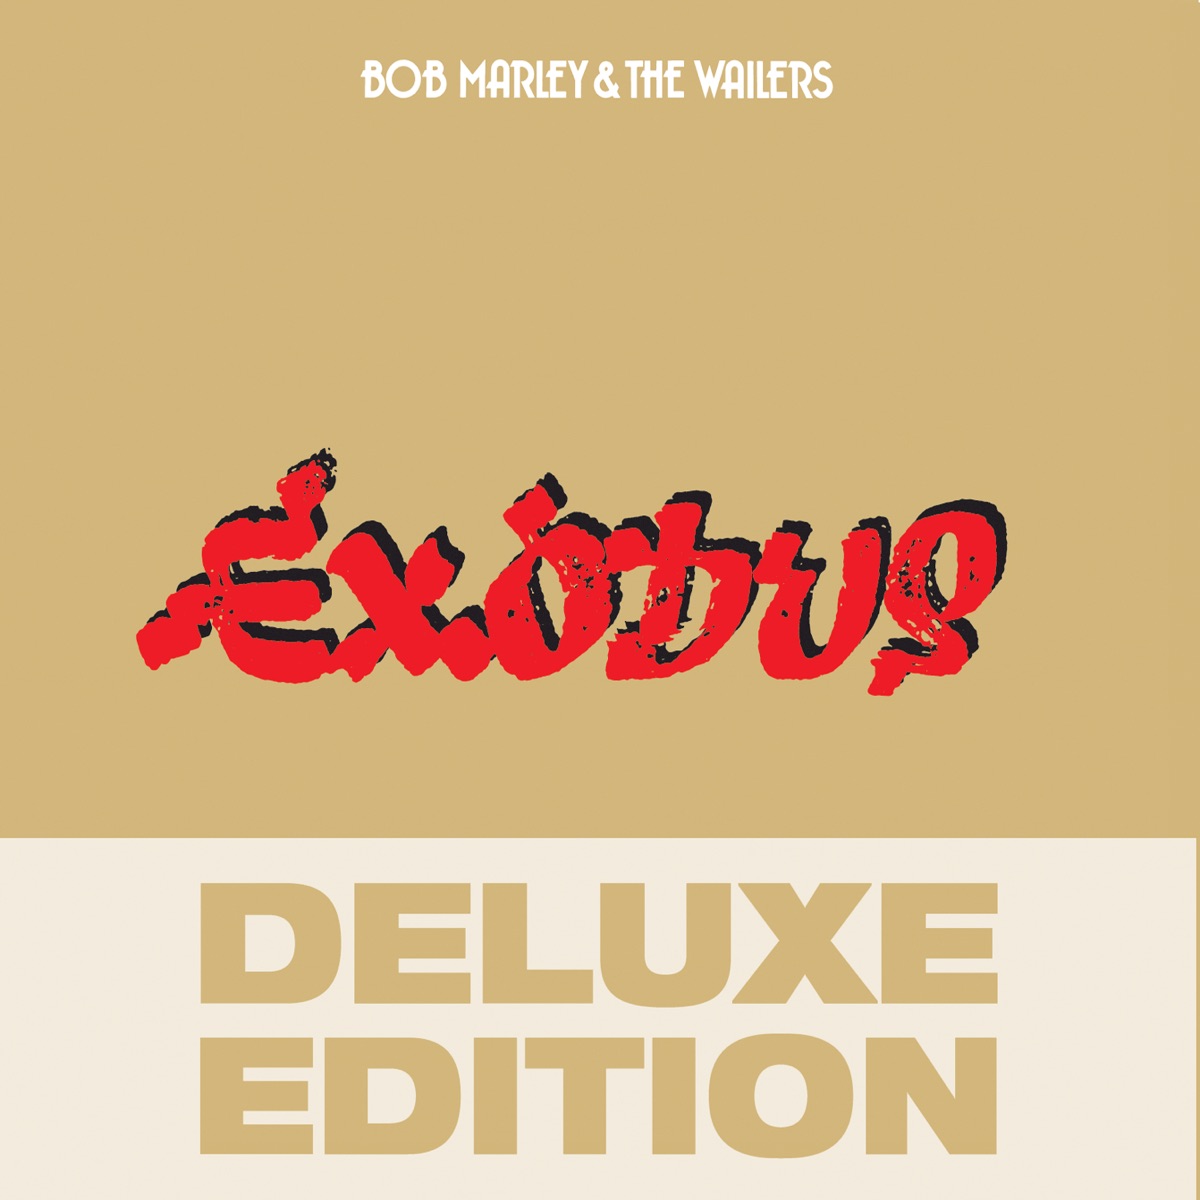 Exodus Album Cover by Bob Marley & The Wailers